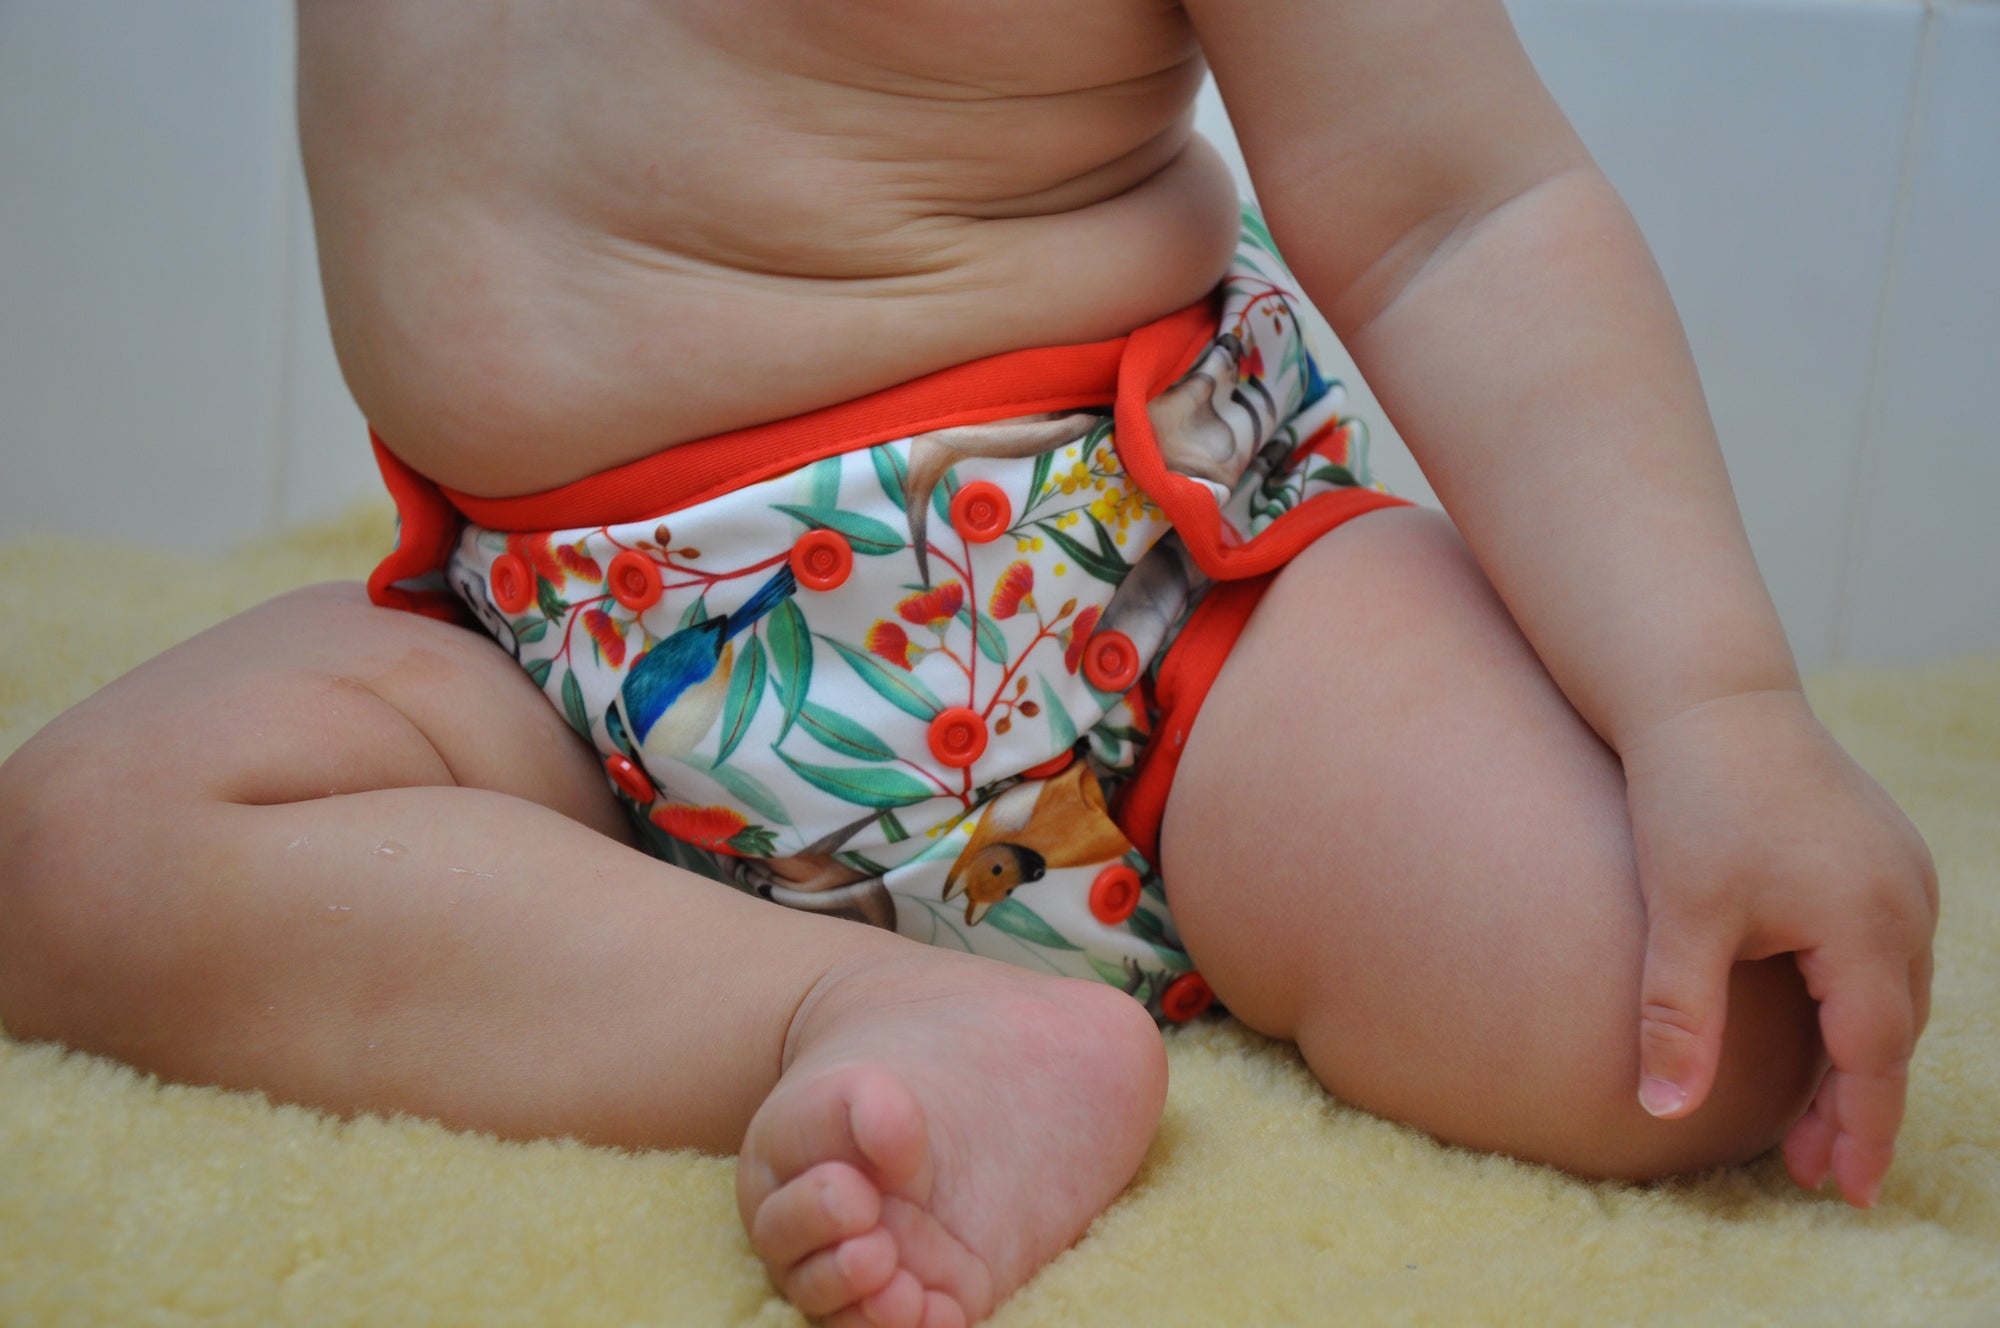 Fitting One-Size-Fits-Most Cloth Nappies